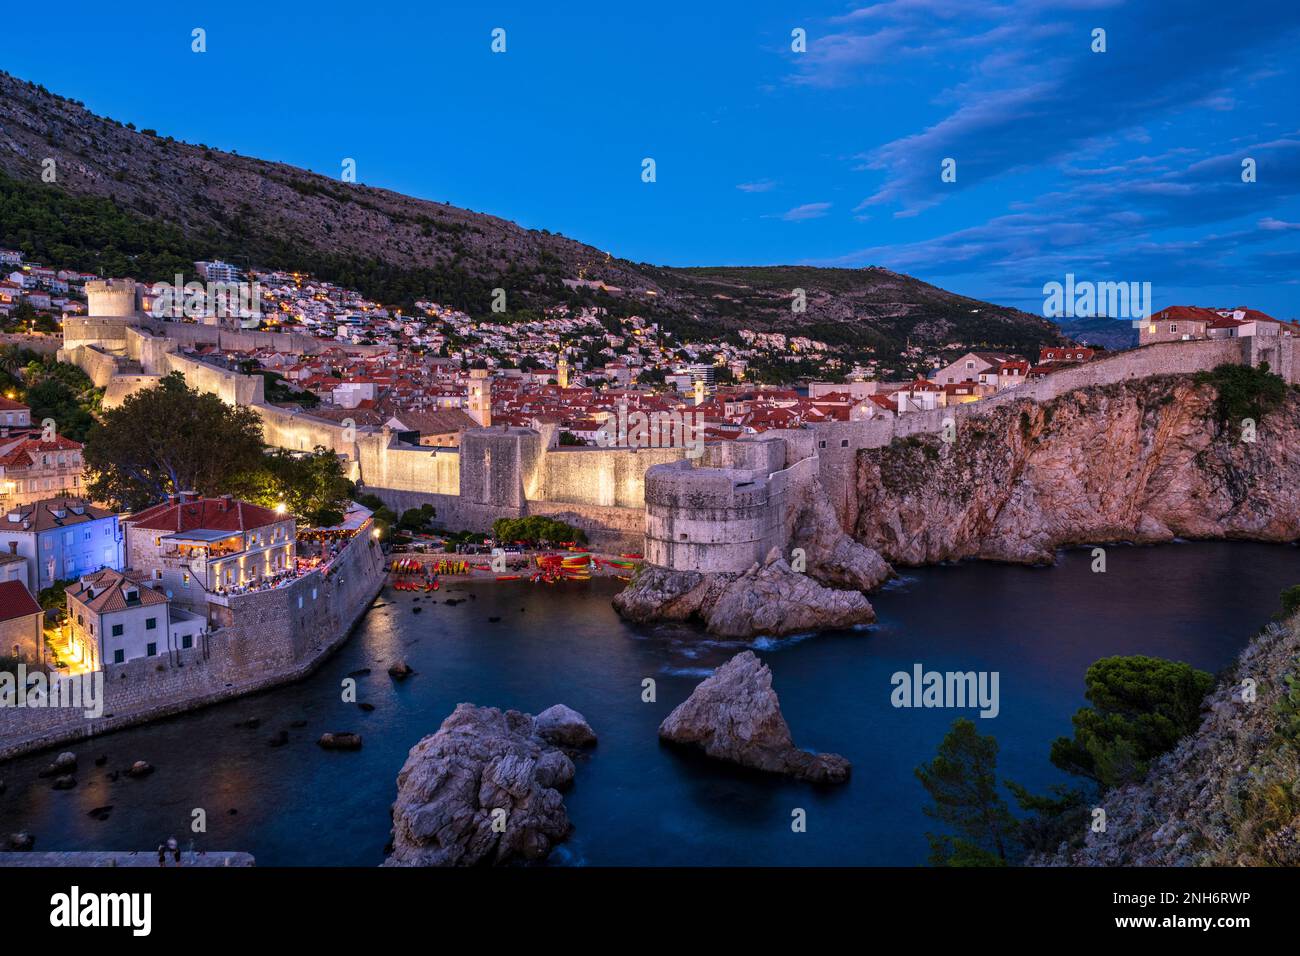 View of the old walled town of Dubrovnik at dusk from Fort Lovrijenac (St Lawrence Fortress) outside the western wall of Dubrovnik in Croatia Stock Photo